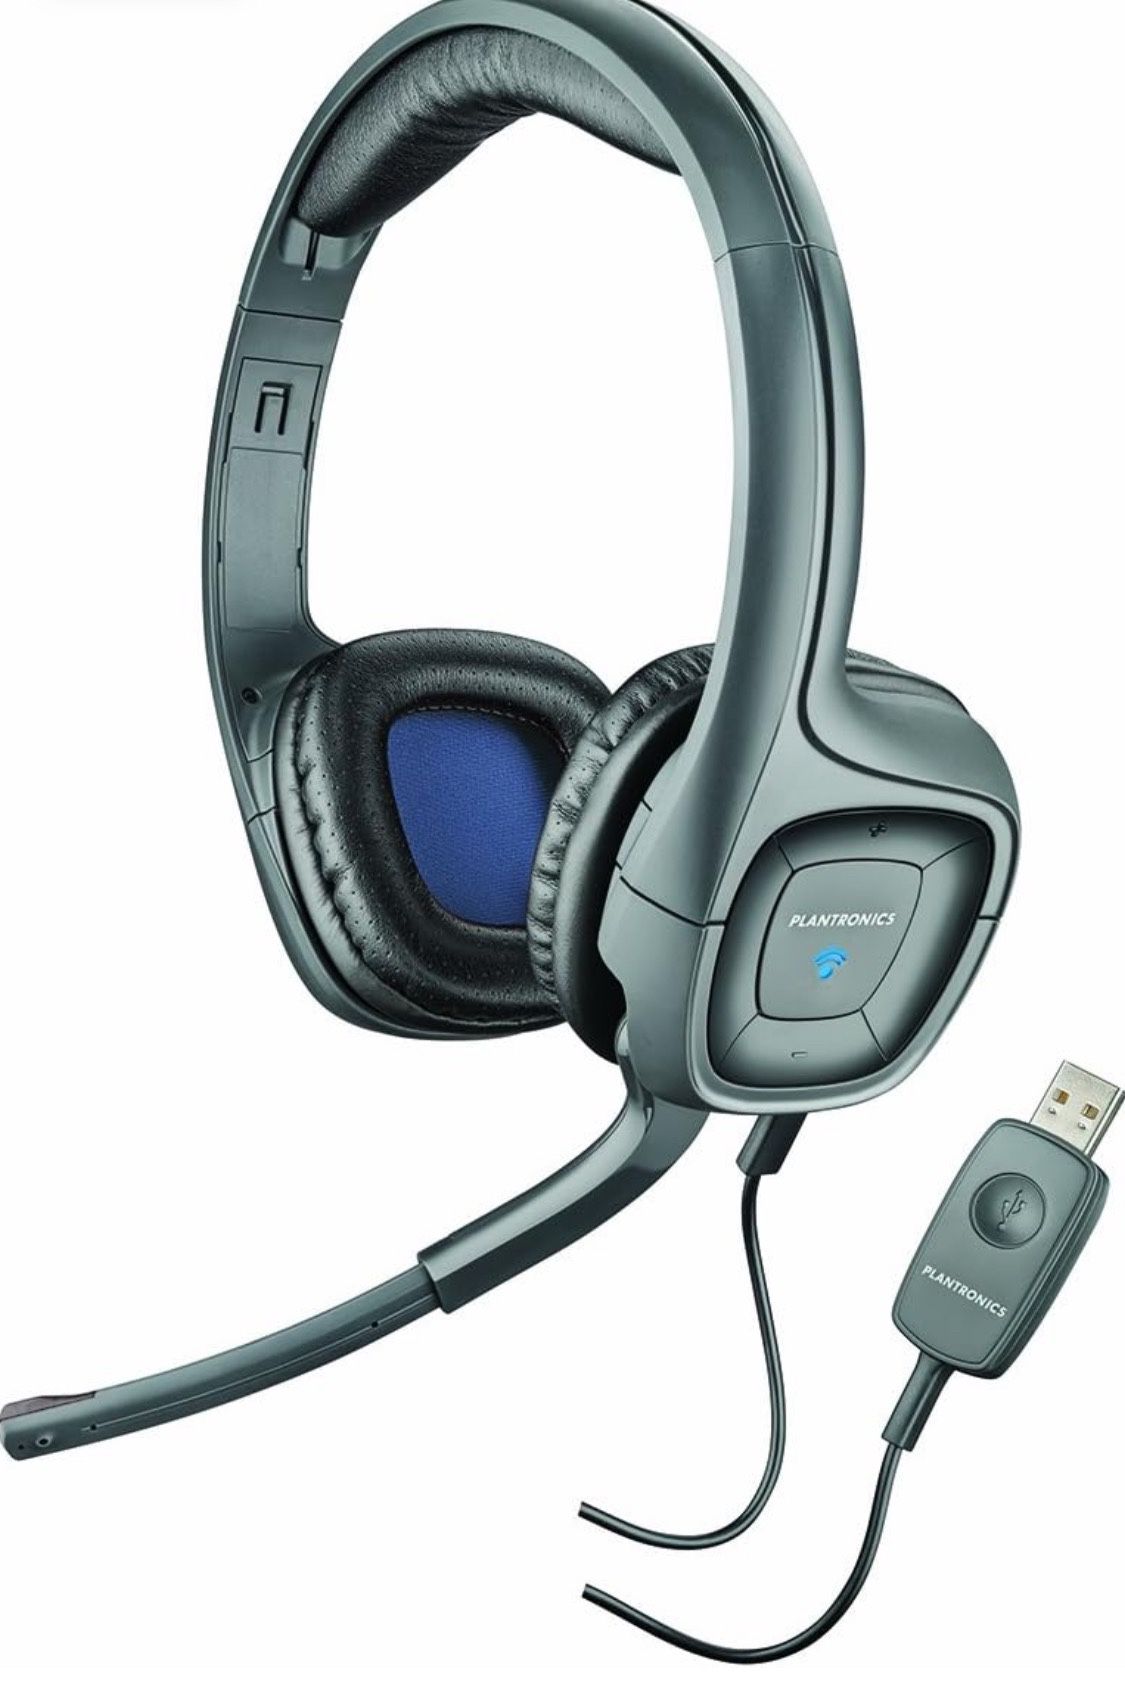 Plantronics Audio 655 USB Multimedia Headset with Noise Canceling Microphone for PC and Mac